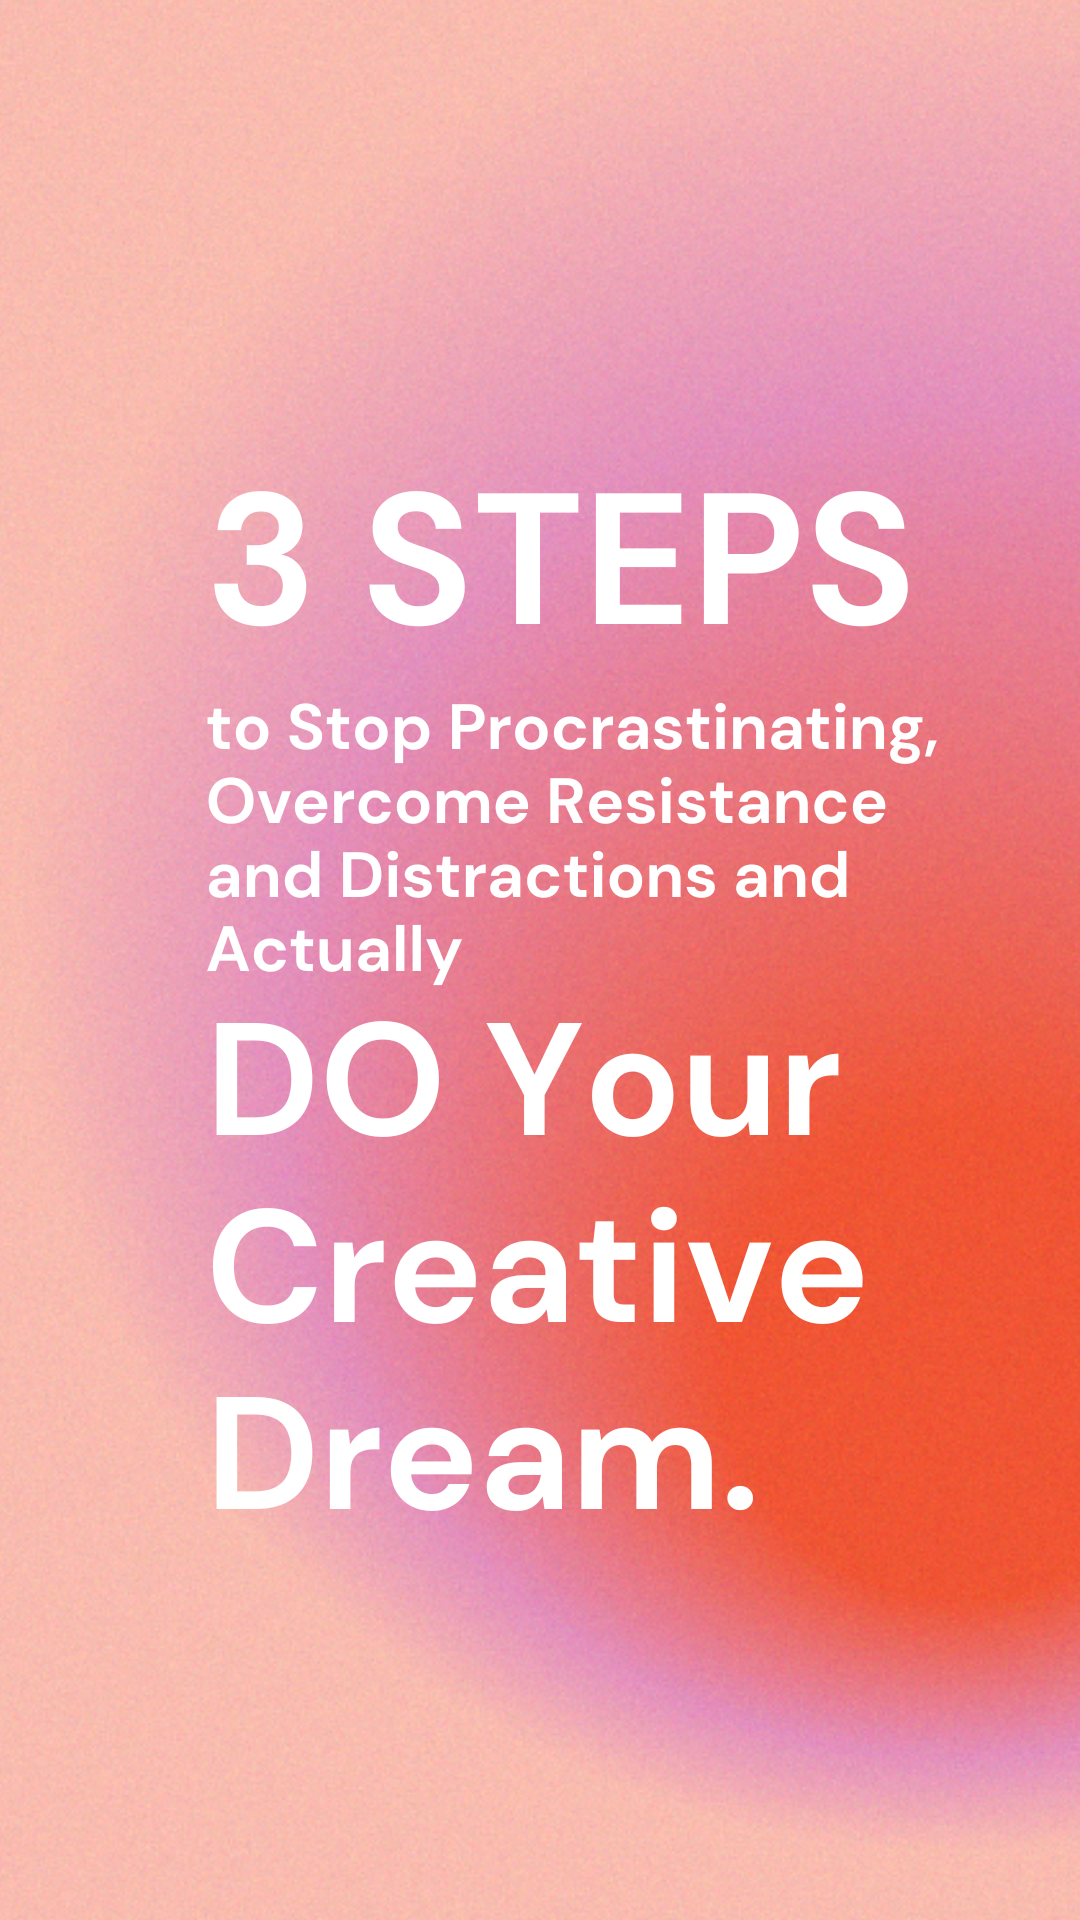 3 Steps to Stop Procrastinating, Overcome Resistance and Distractions and Actually DO Your Creative Dream.